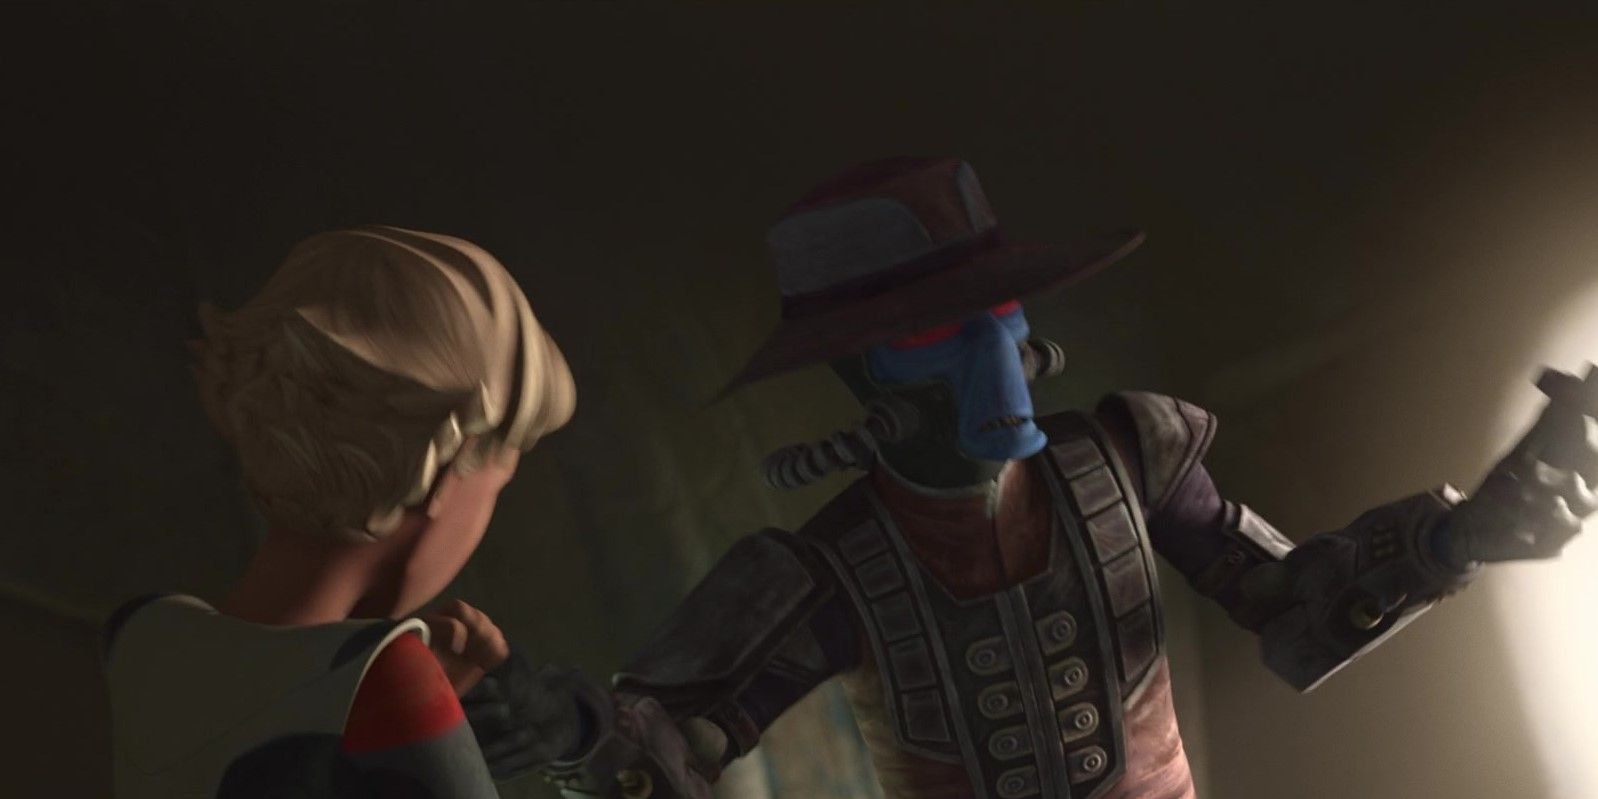 Cad Bane grabs Omega's arm and activates a button with his other hand in Star Wars: The Bad Batch season 1 episode 9